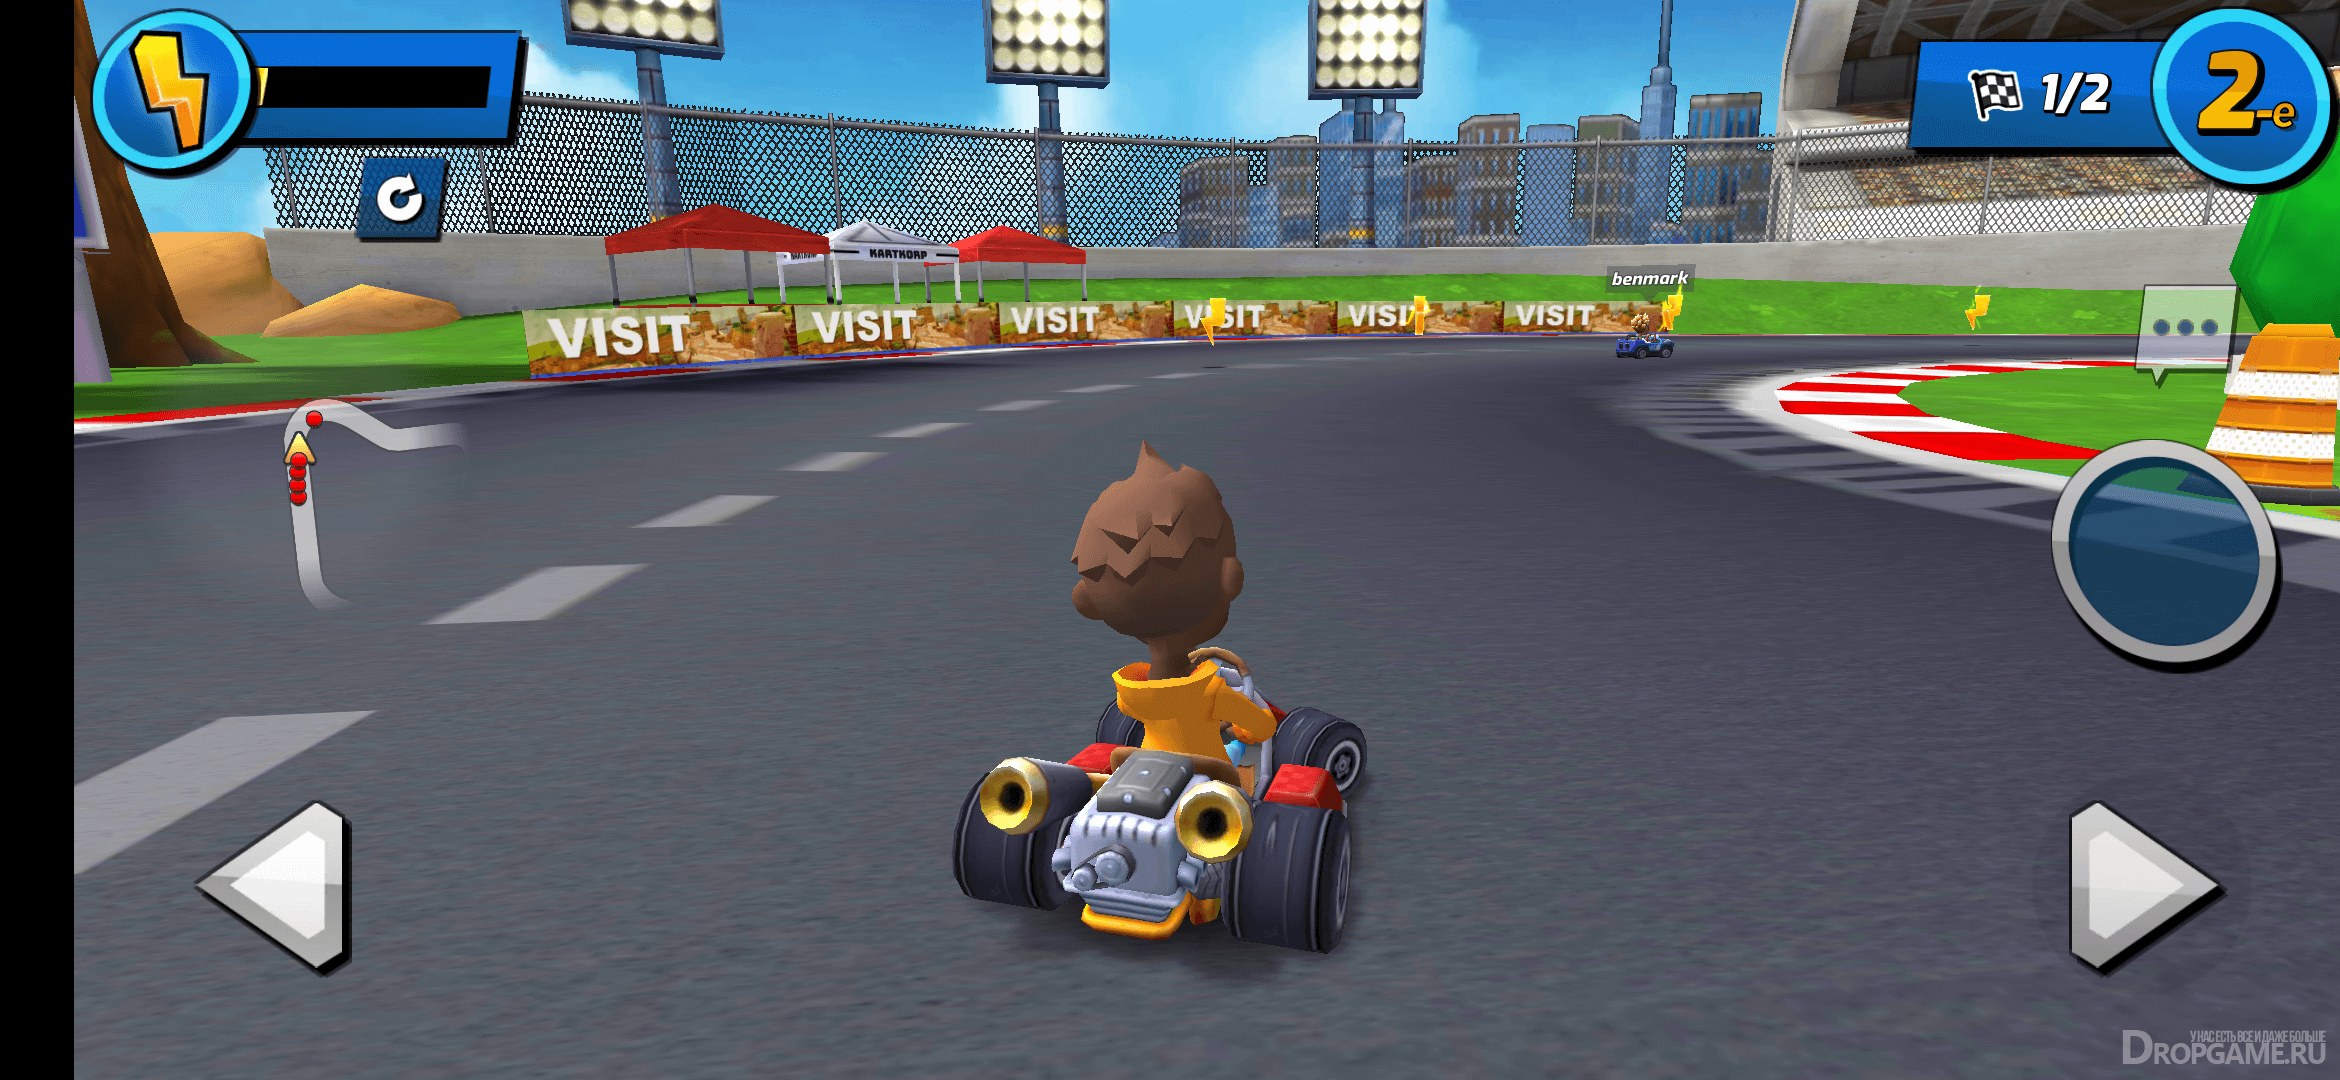 Boom Karts Multiplayer Racing v1.33.1 MOD APK -  - Android &  iOS MODs, Mobile Games & Apps